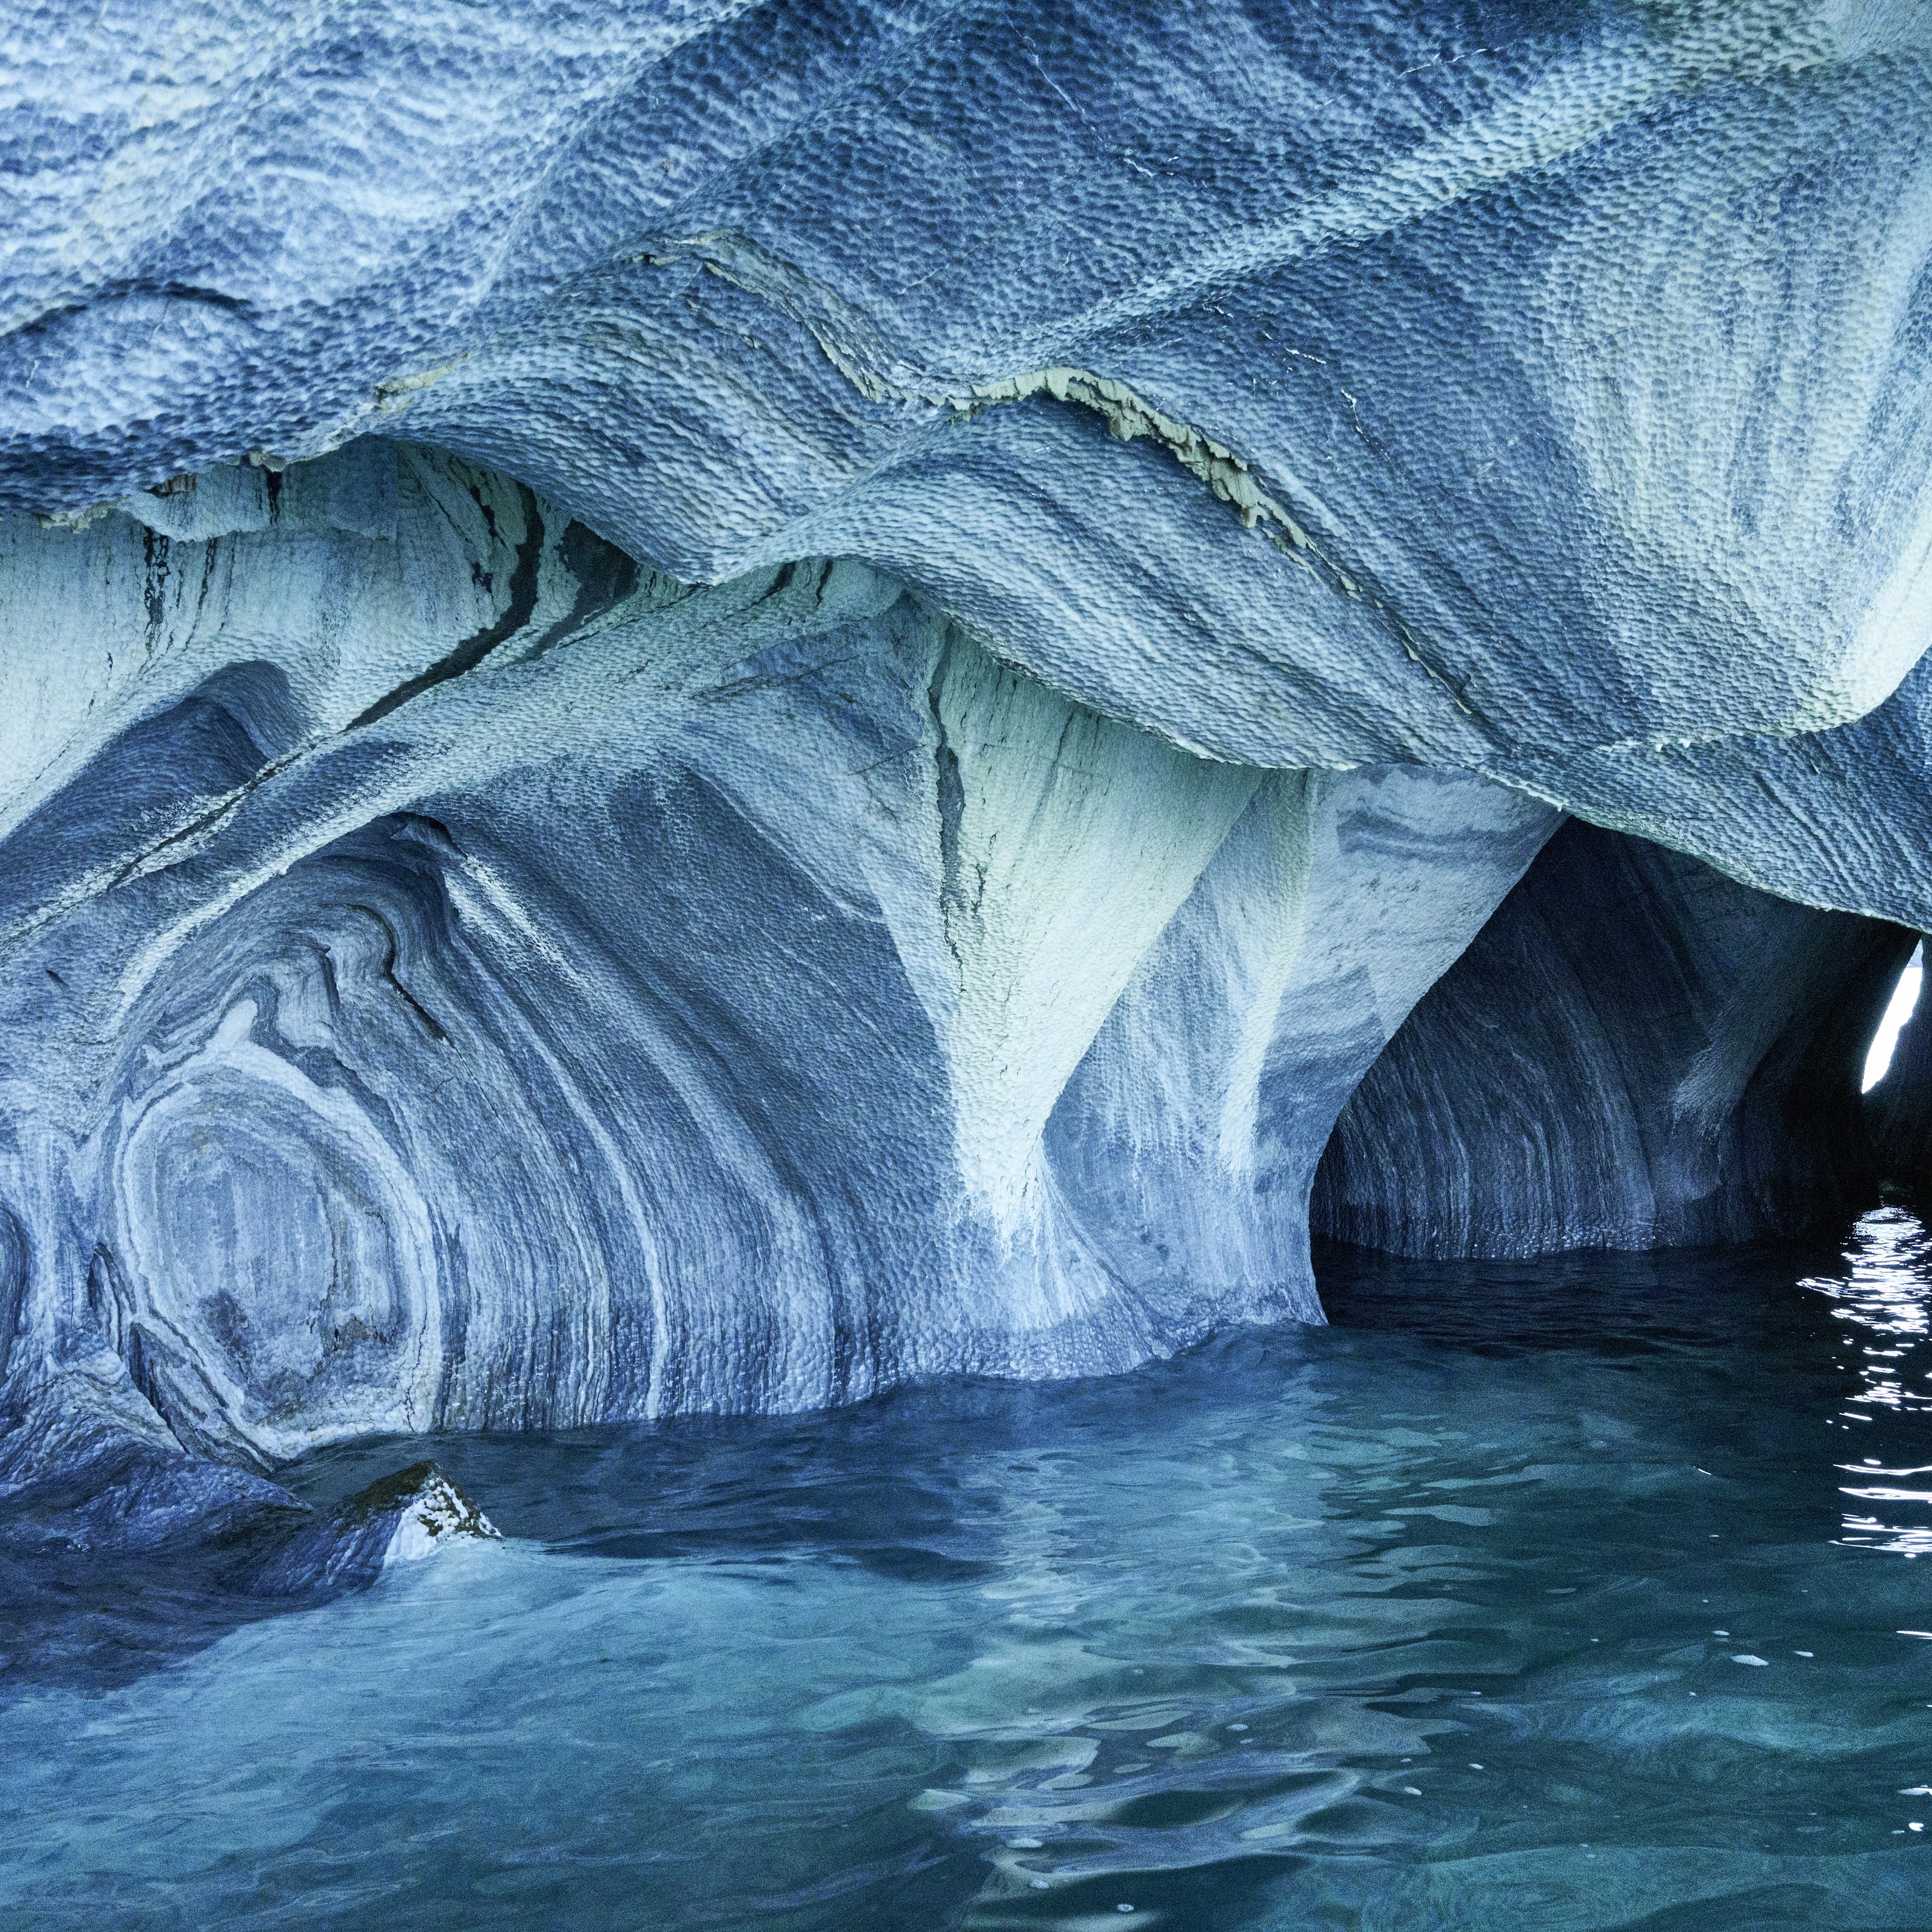 The Marble Caves of Patagonia, Chile. Turquoise colors and splendid shapes create imagery of unearthly beauty carved out by nature.